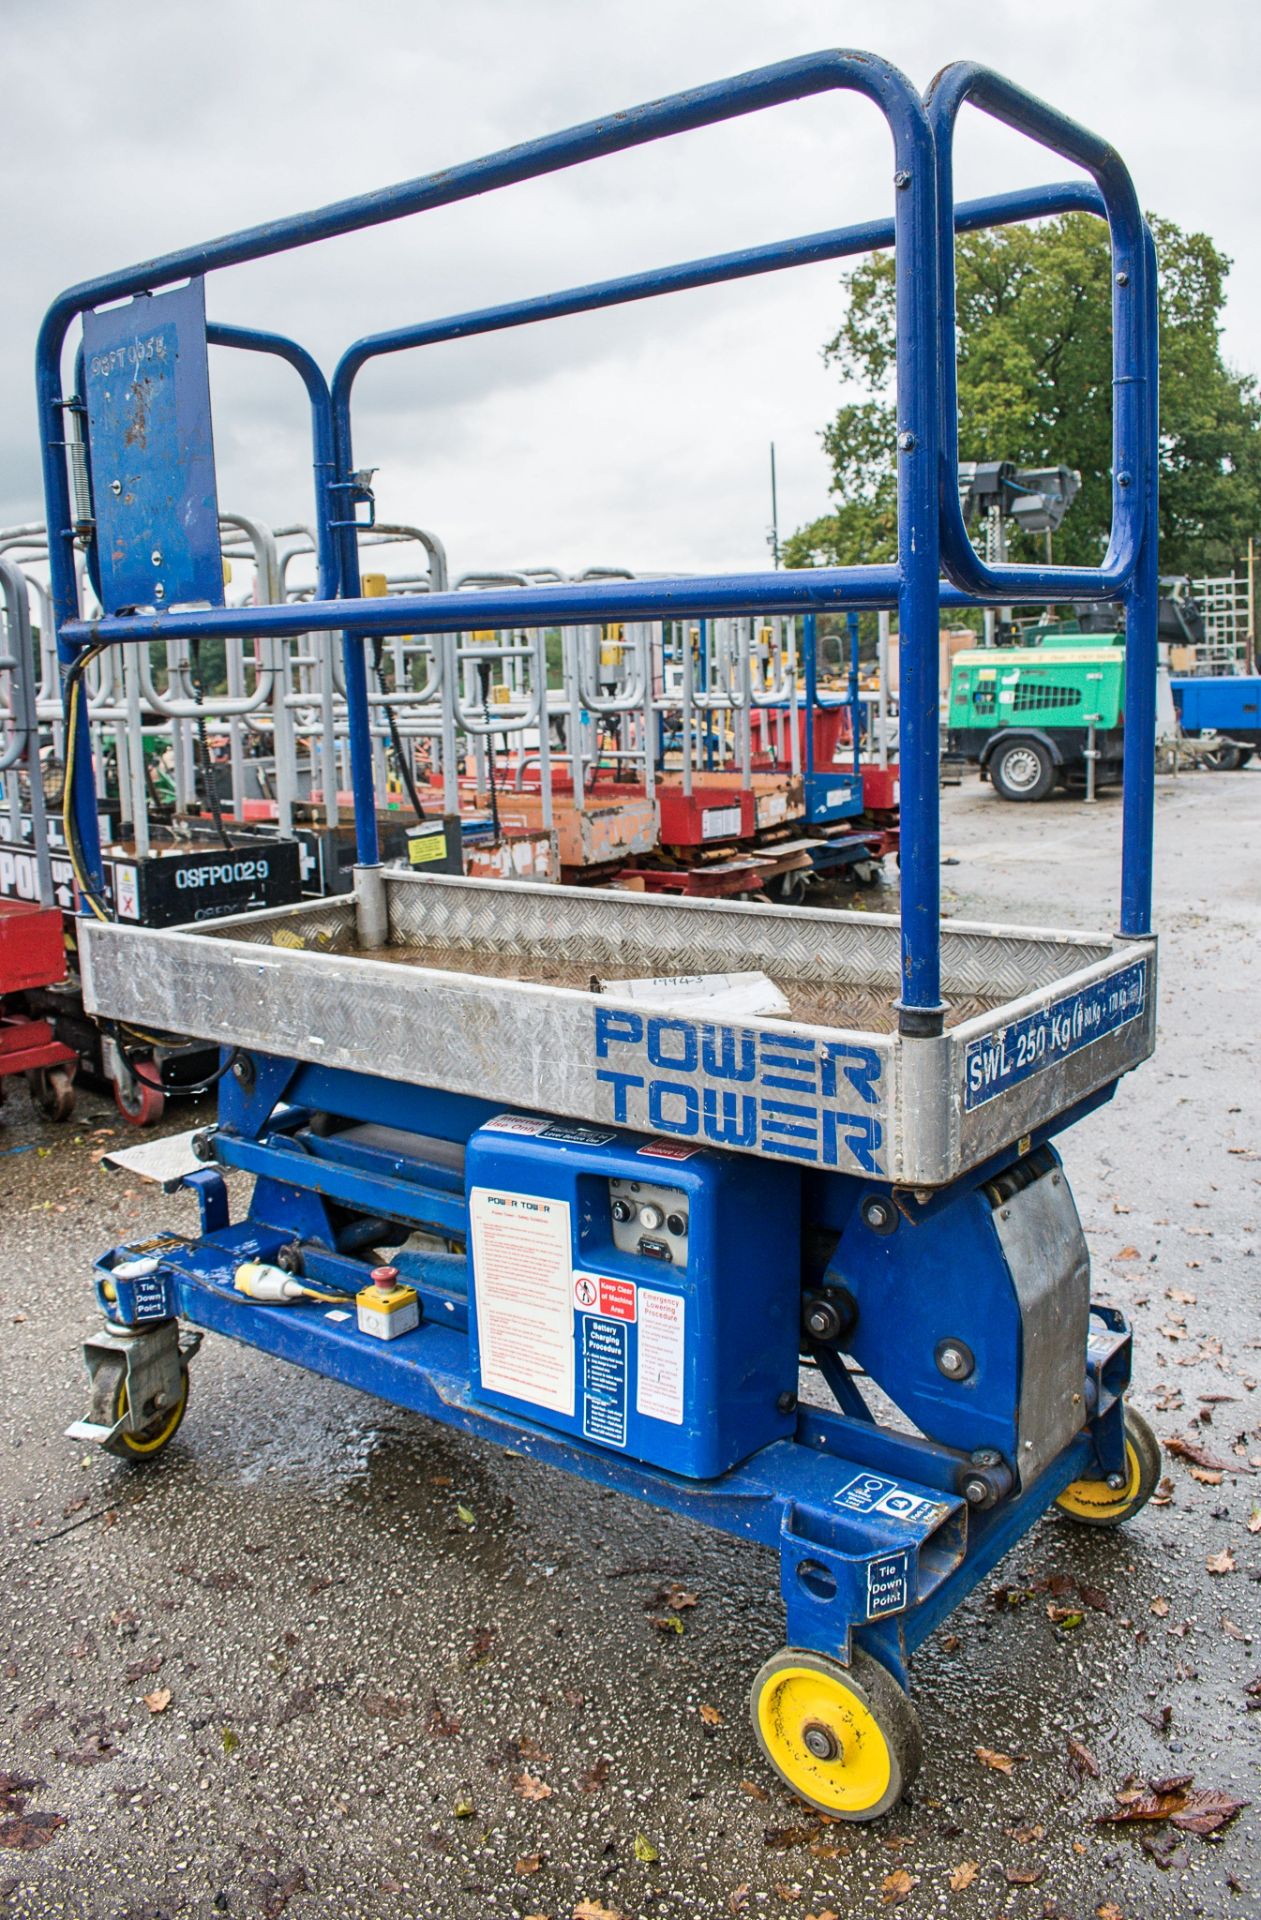 Power Tower push around battery electric scissor lift 08PT0055 - Image 2 of 4